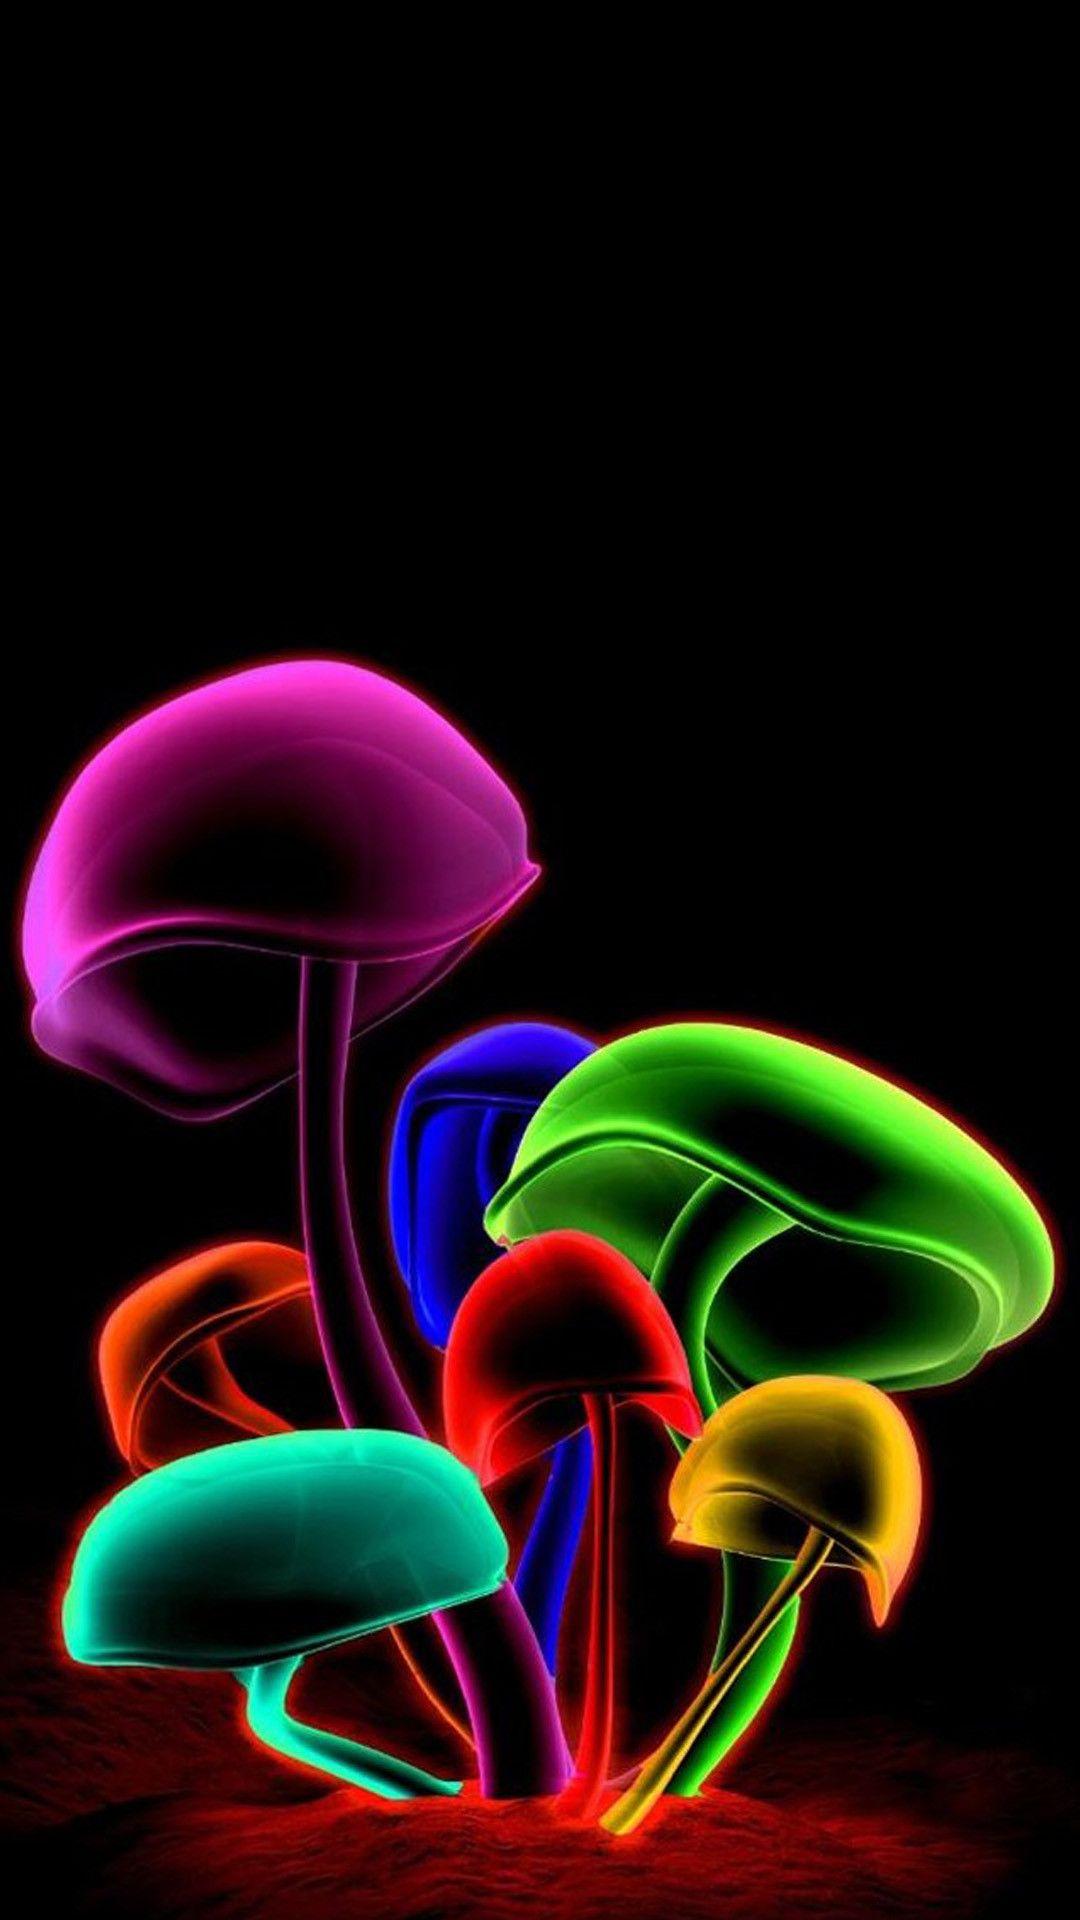 3d Wallpaper Android Free Image Num 29